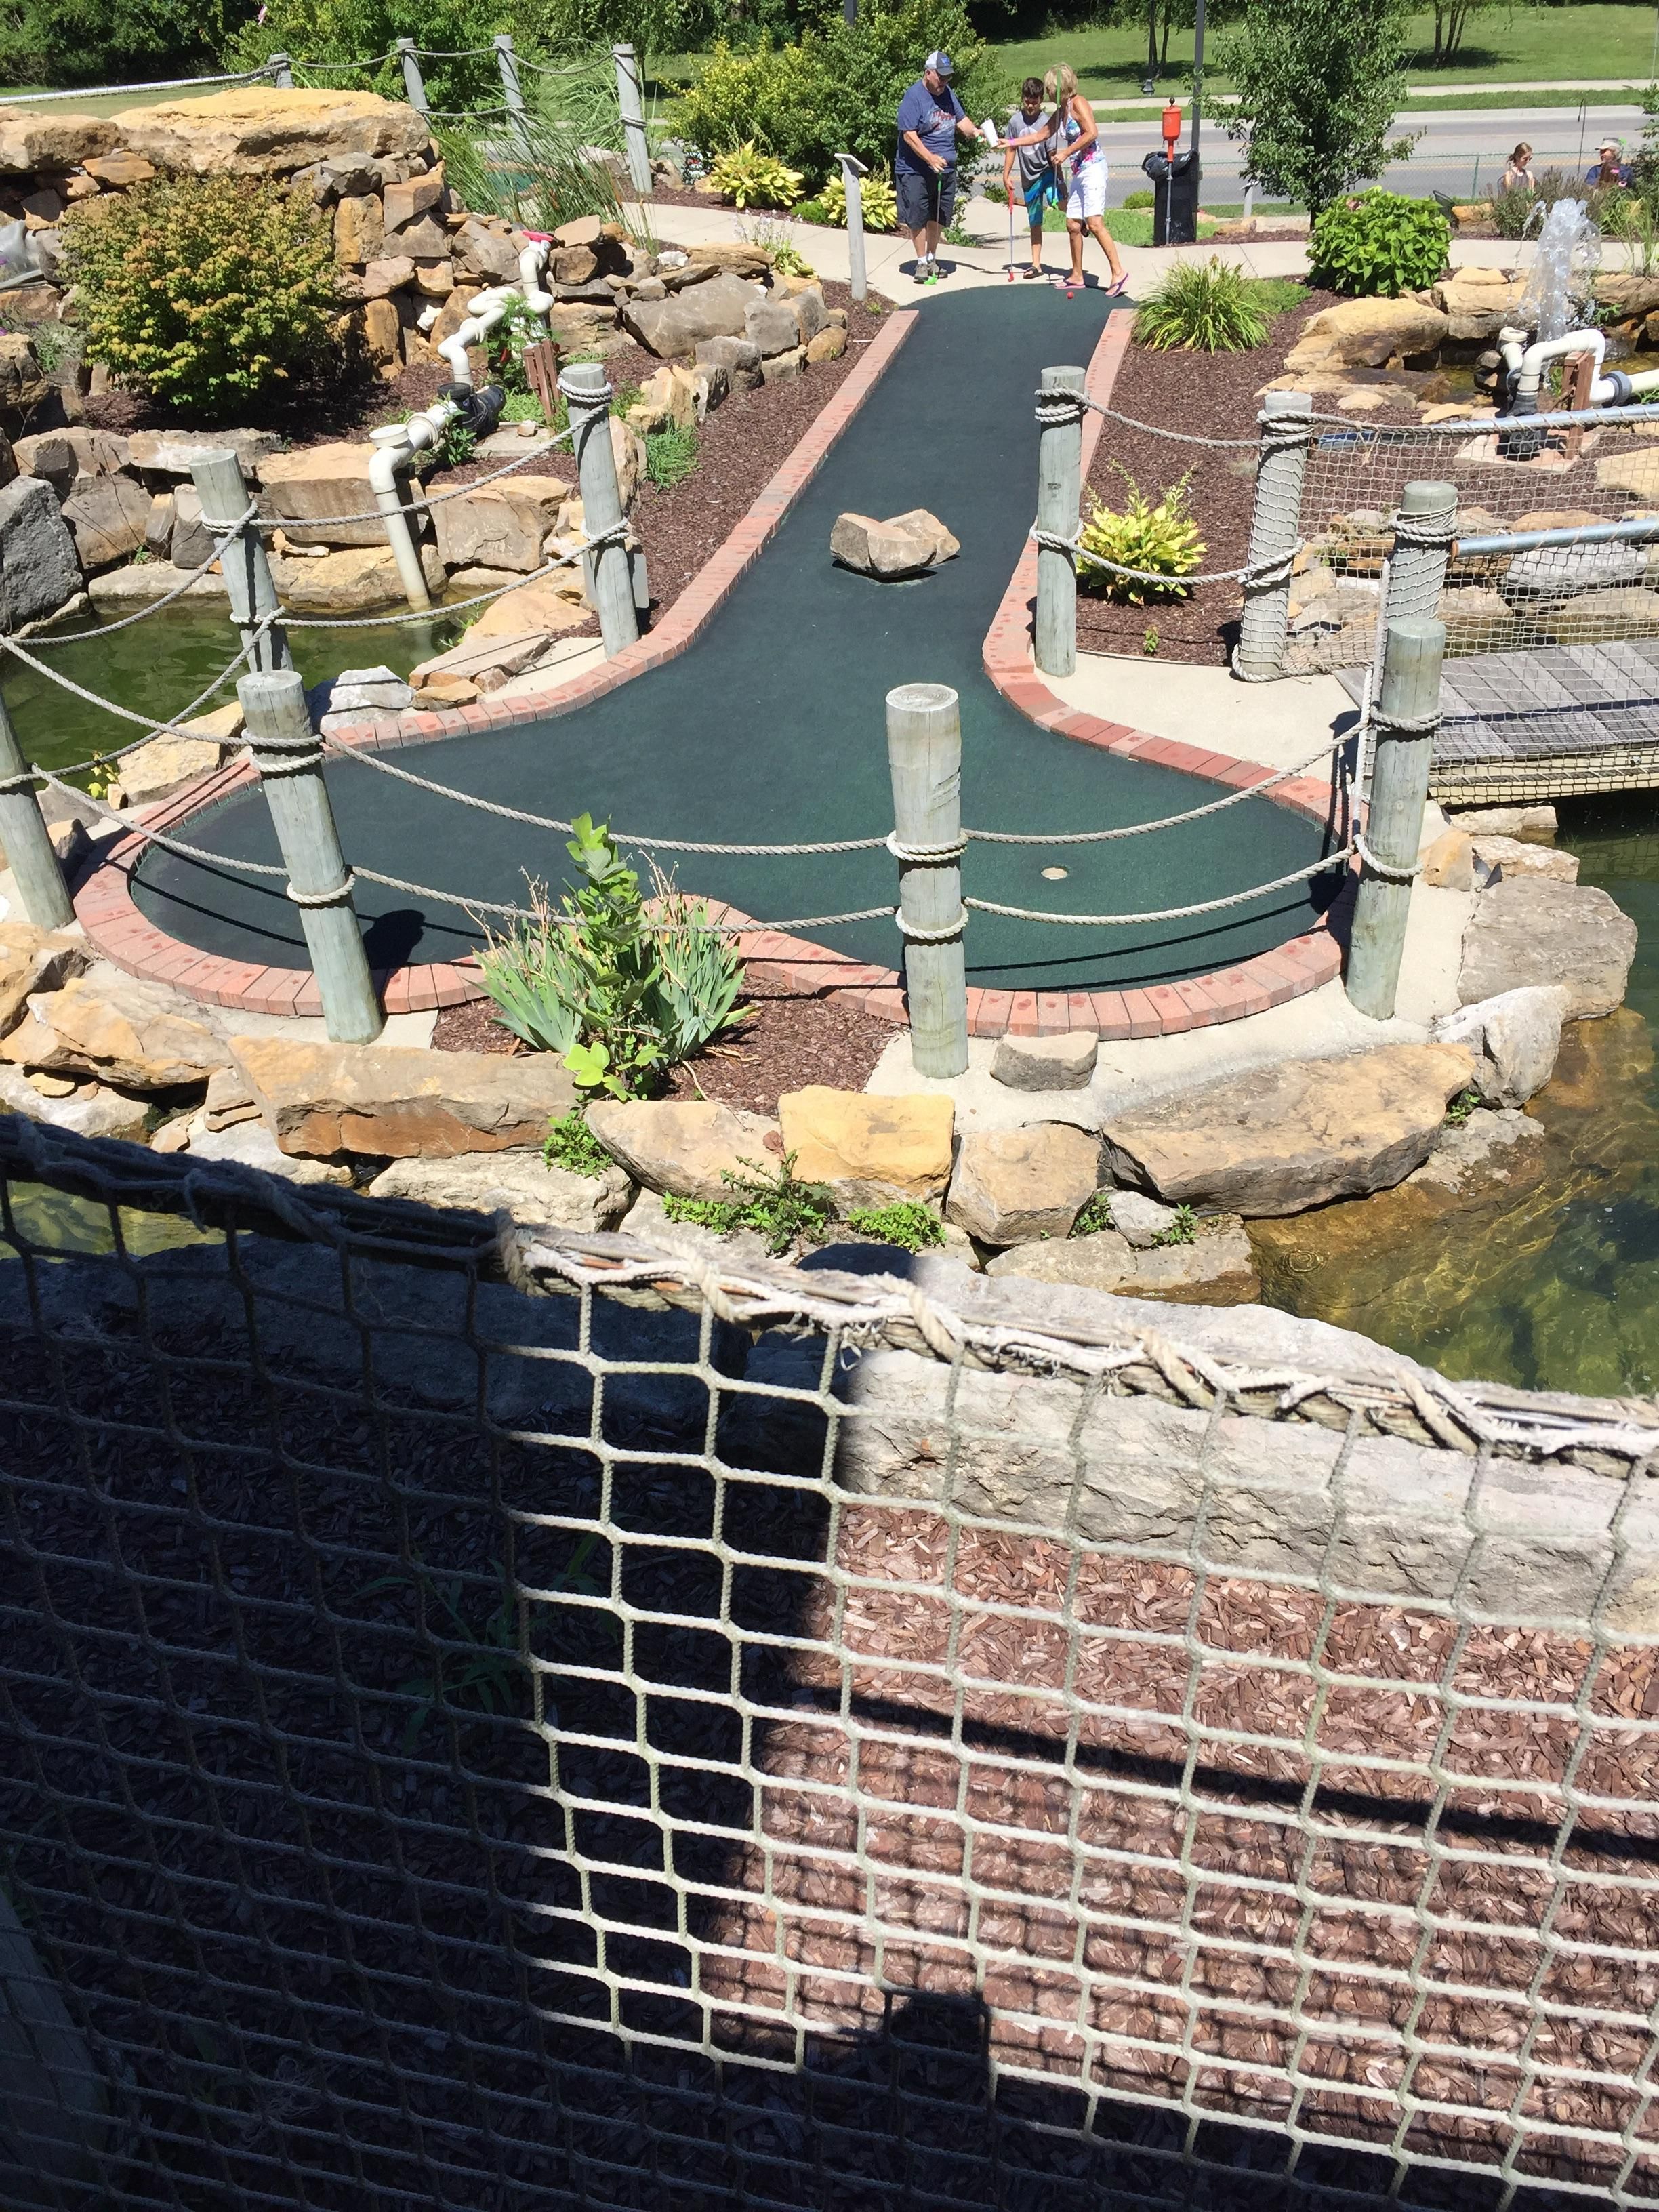 Played miniature golf today...... this one was particularly hard